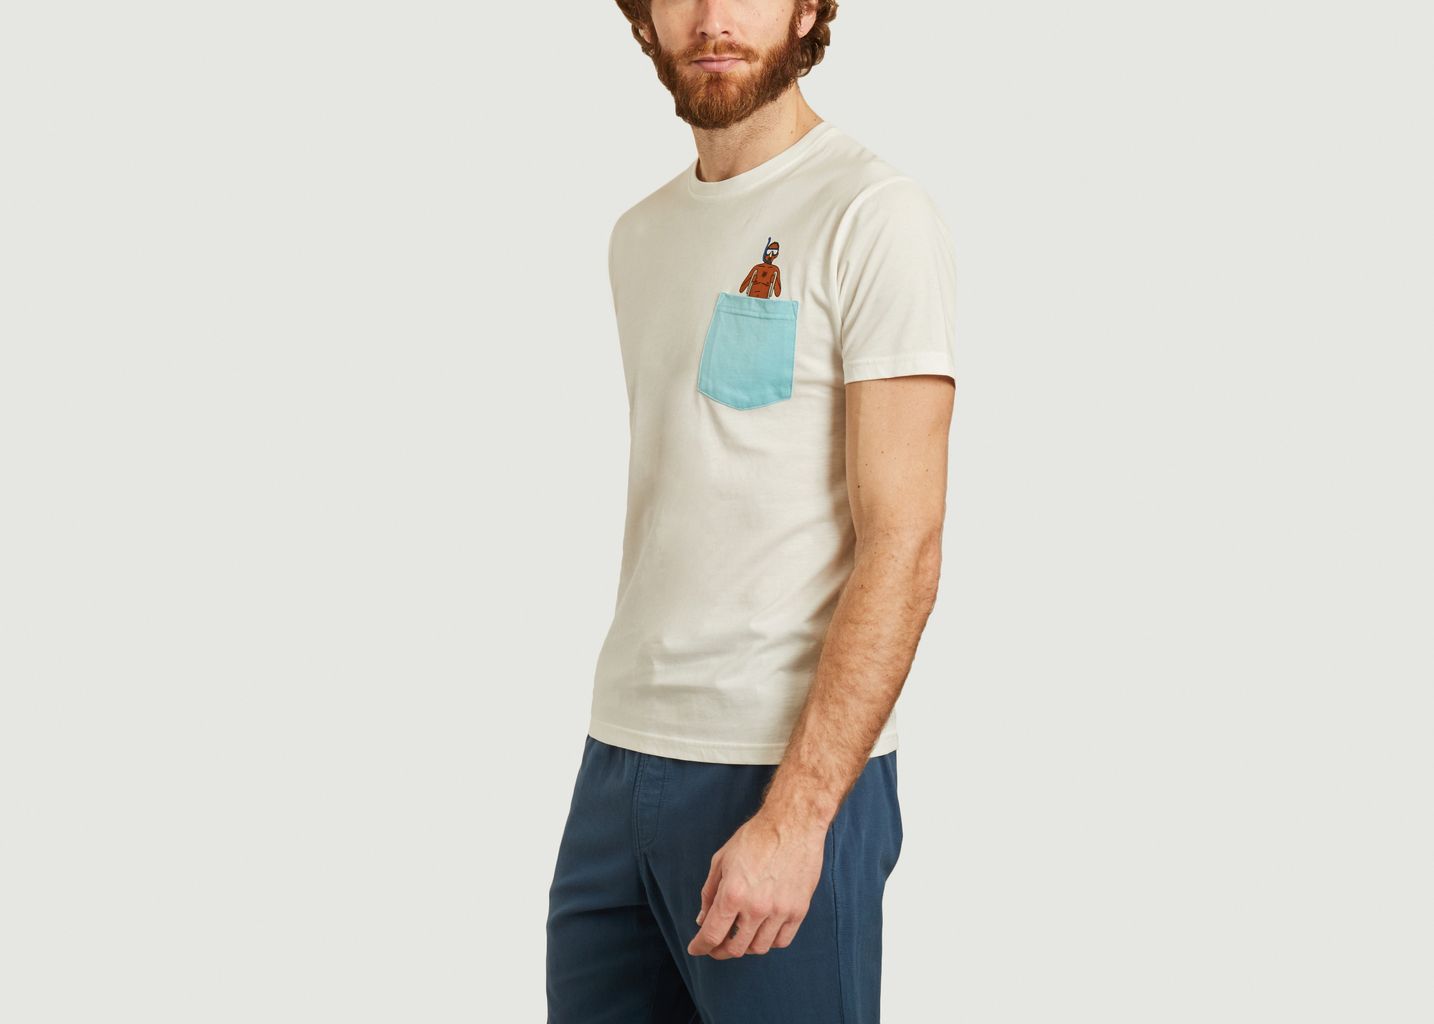 Diver T-shirt - Olow